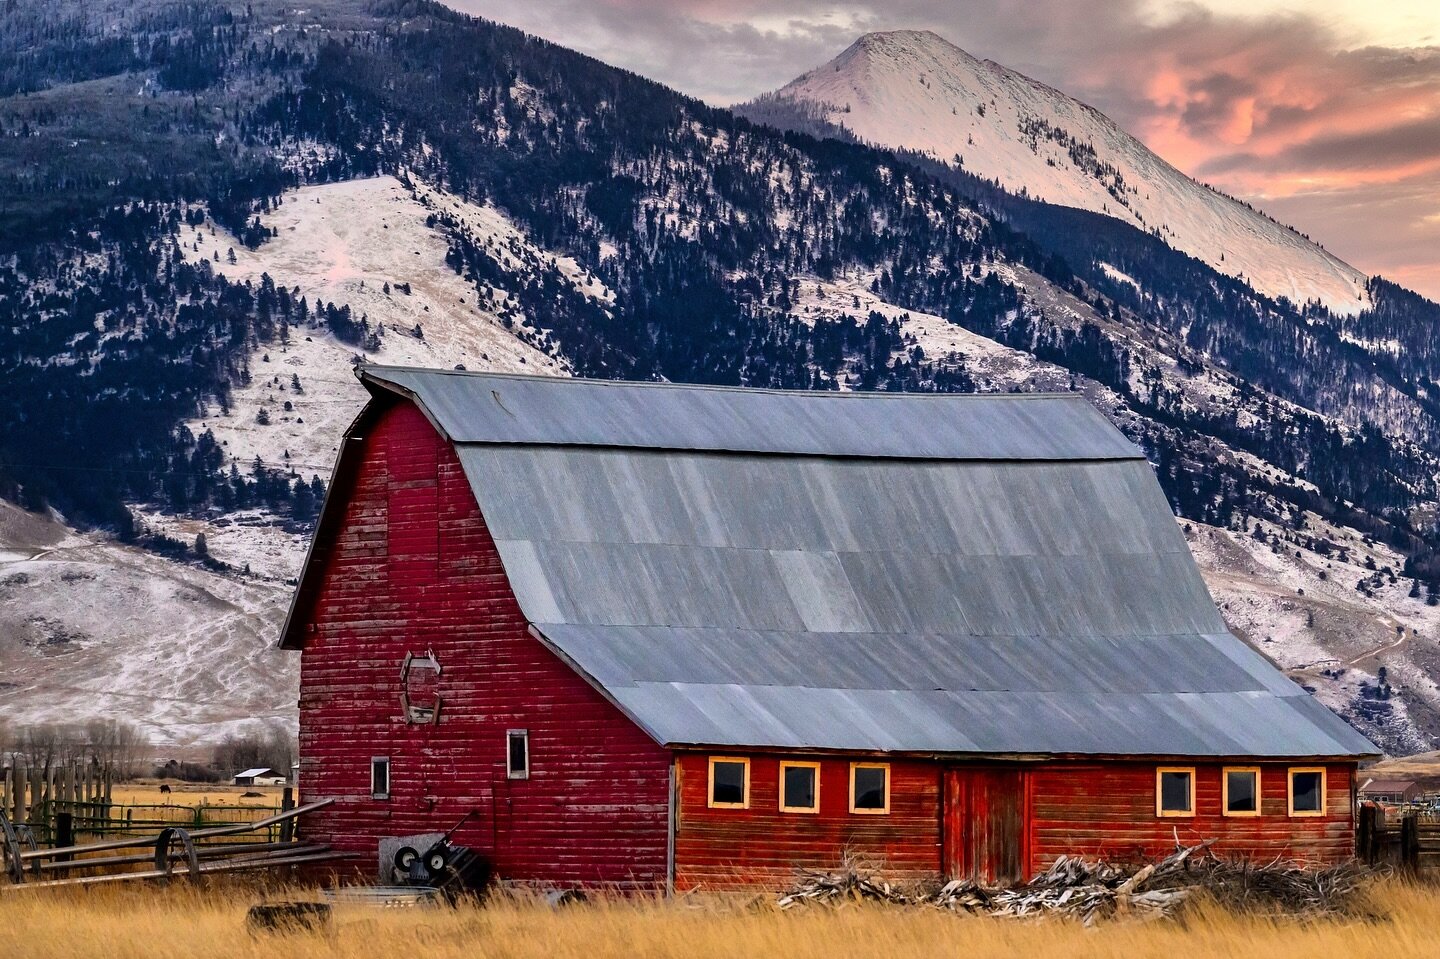 There&rsquo;s Just Something About a Red Barn in the Valley of Montana Mountains!
.
#redbarn #oldbarn #paradisevalley #montanamoment #yellowstone #yellowstonecountry